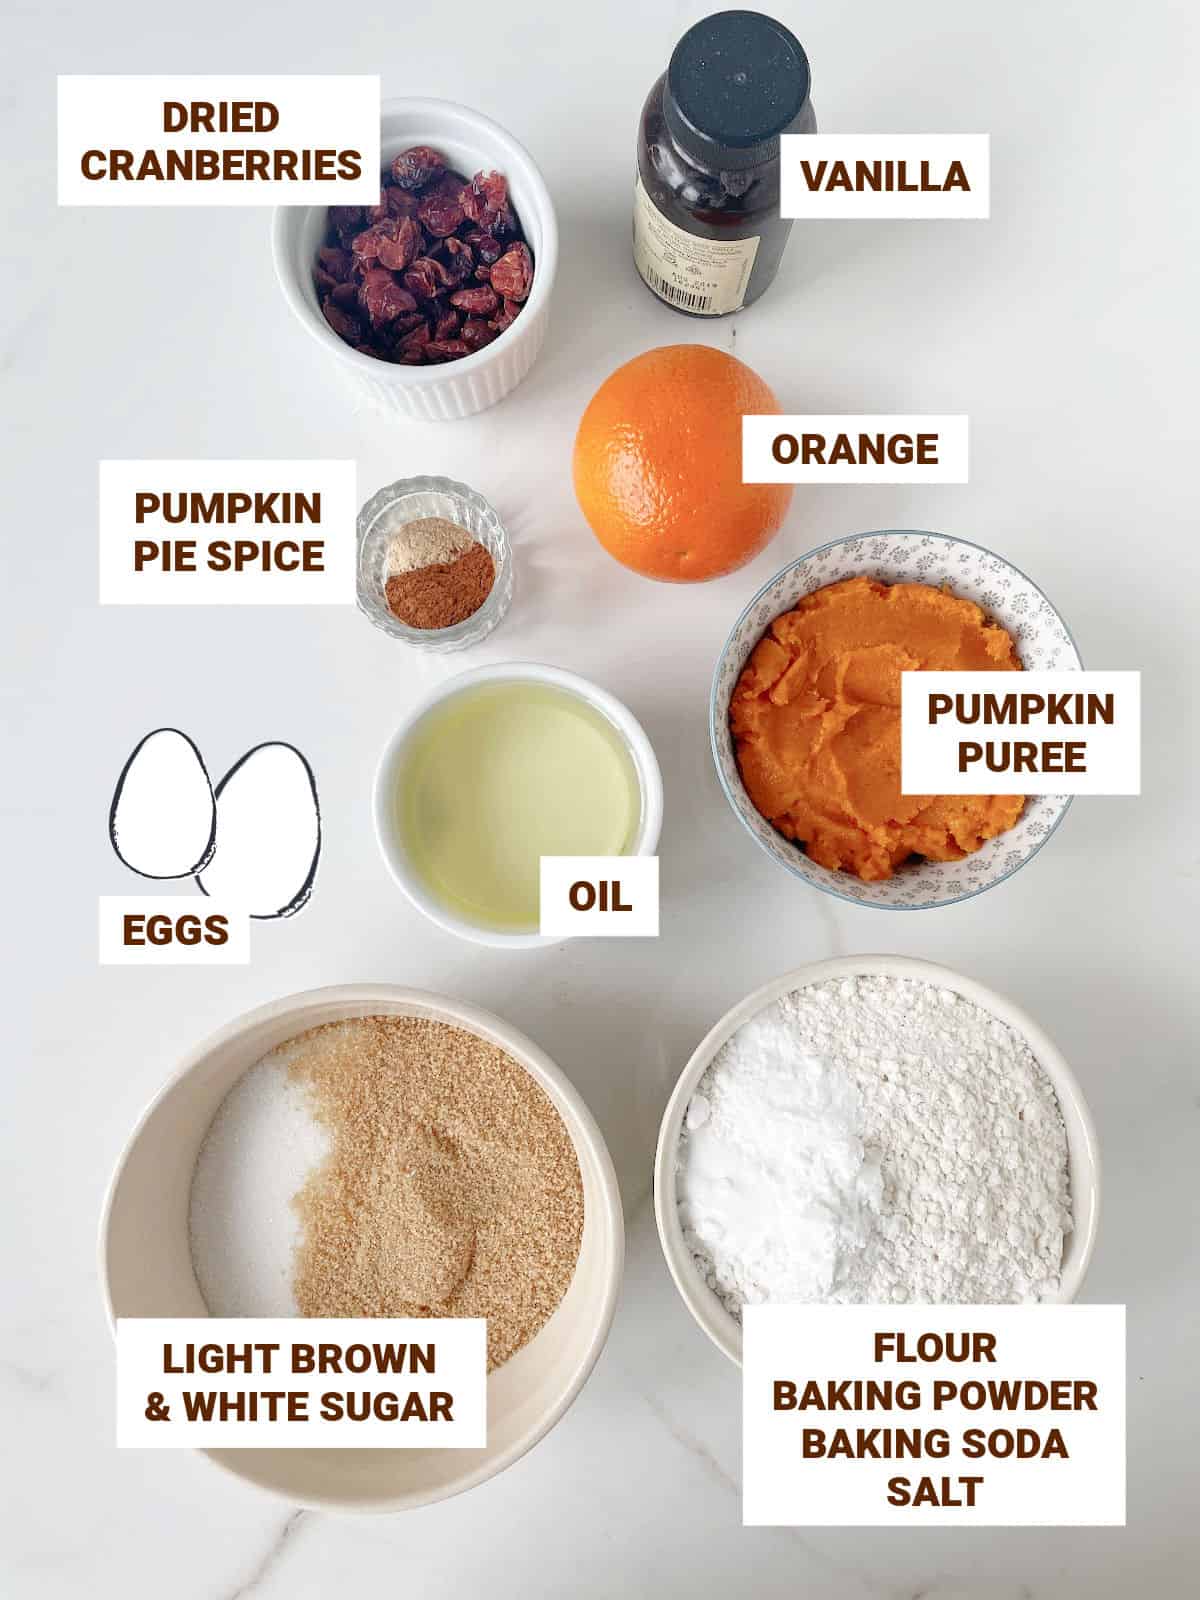 Bowls on white marble surface with ingredients for pumpkin cranberry muffins including oil, eggs, spices, sugar, flour, orange, vanilla.